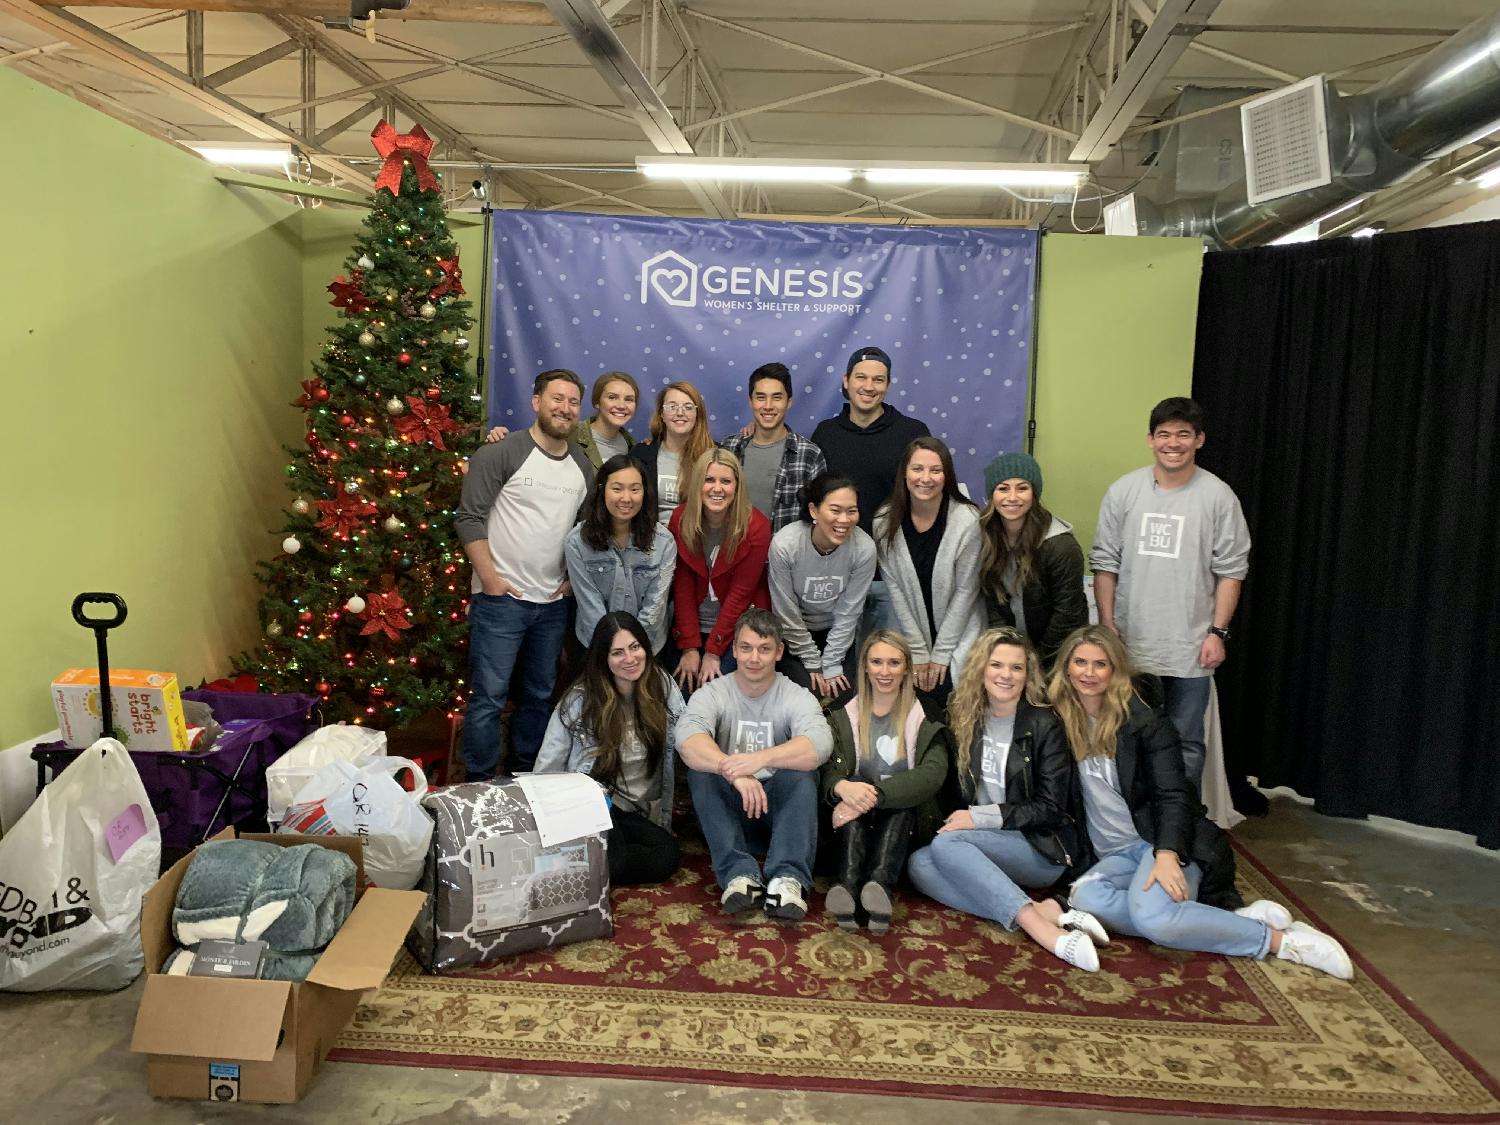 Our Dallas team volunteering at Genesis Women's Shelter for the holidays.